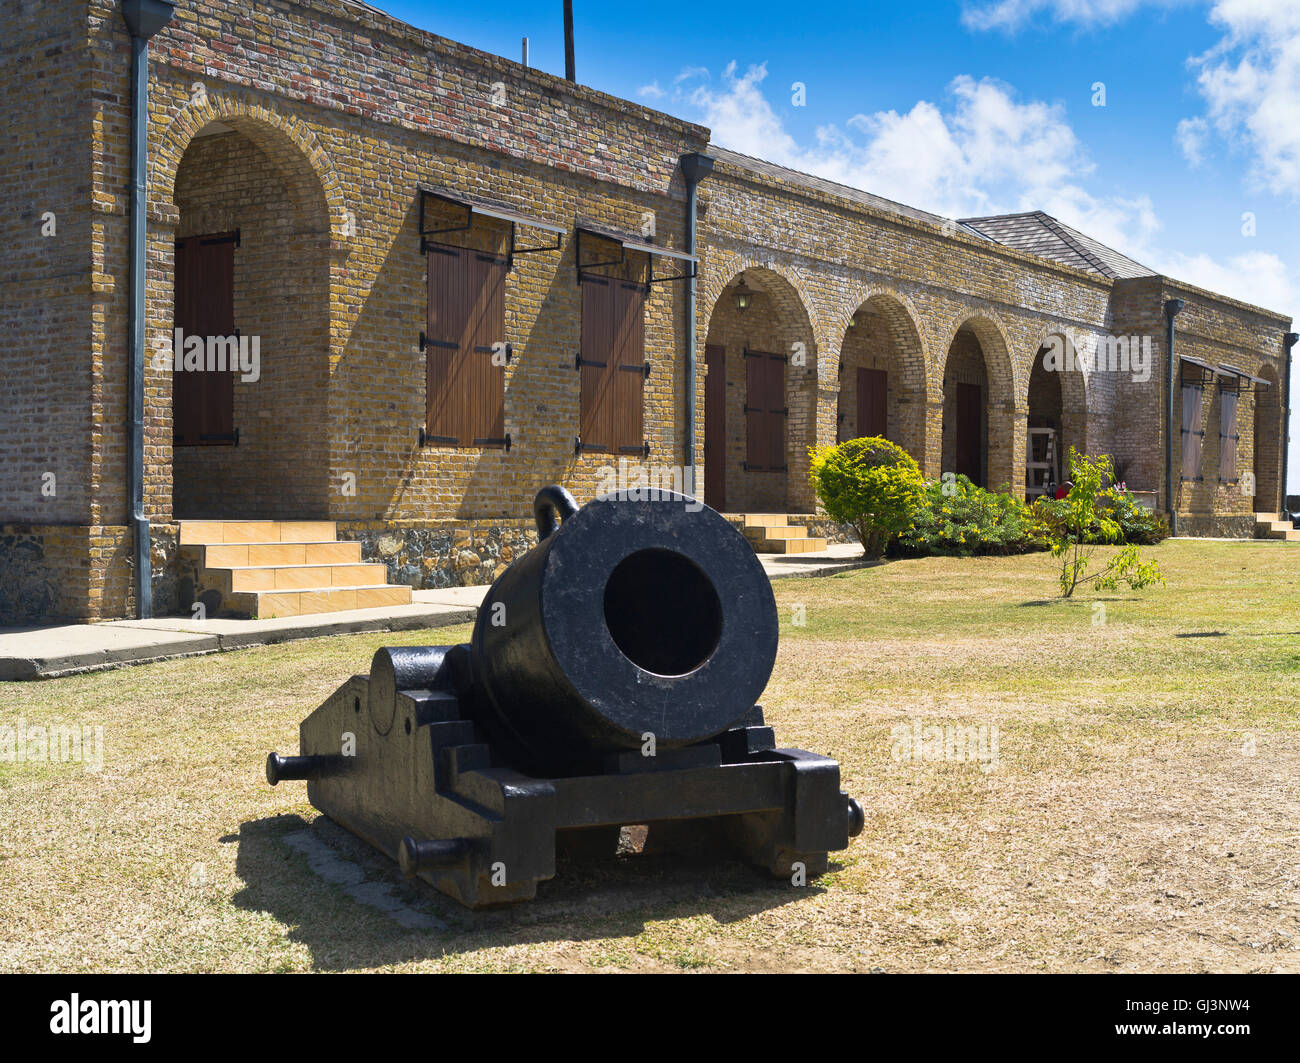 dh Fort King George museum TOBAGO CARIBBEAN Old colonial buildings Scarborough mortar cannon Stock Photo